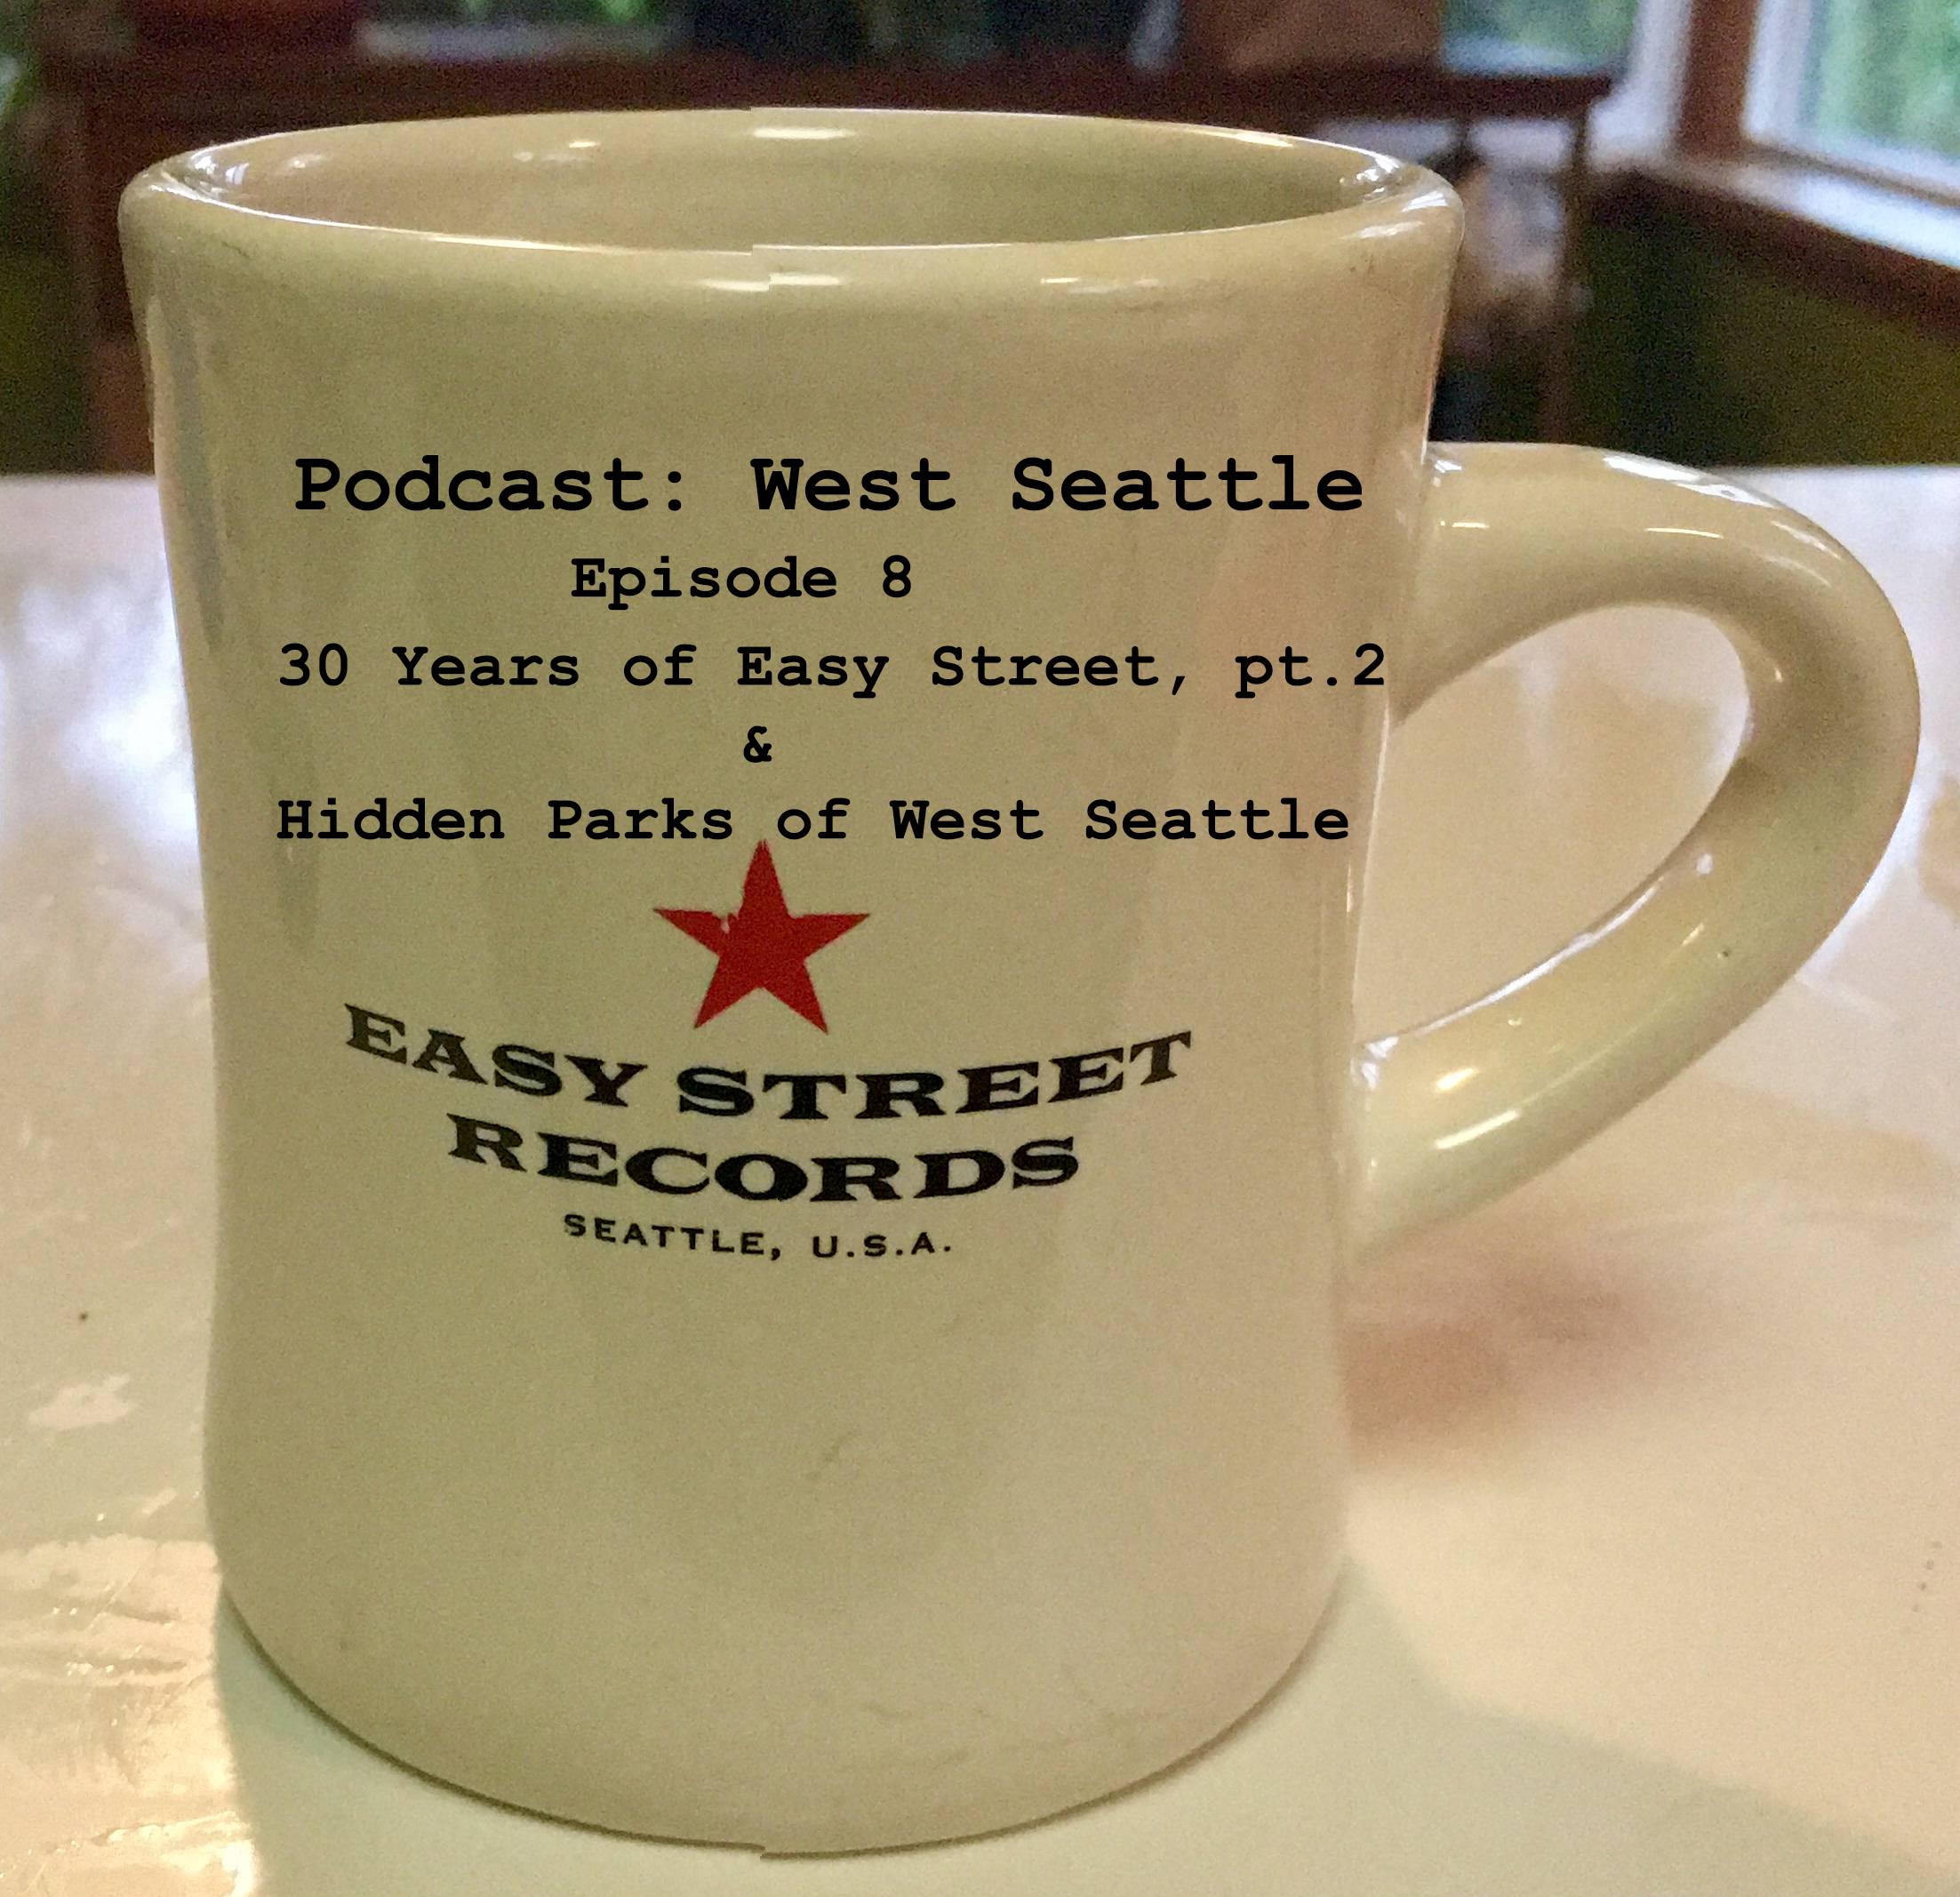 Episode 8 - 30 Years Of Easy Street Pt.2 & Hidden Parks Of West Seattle